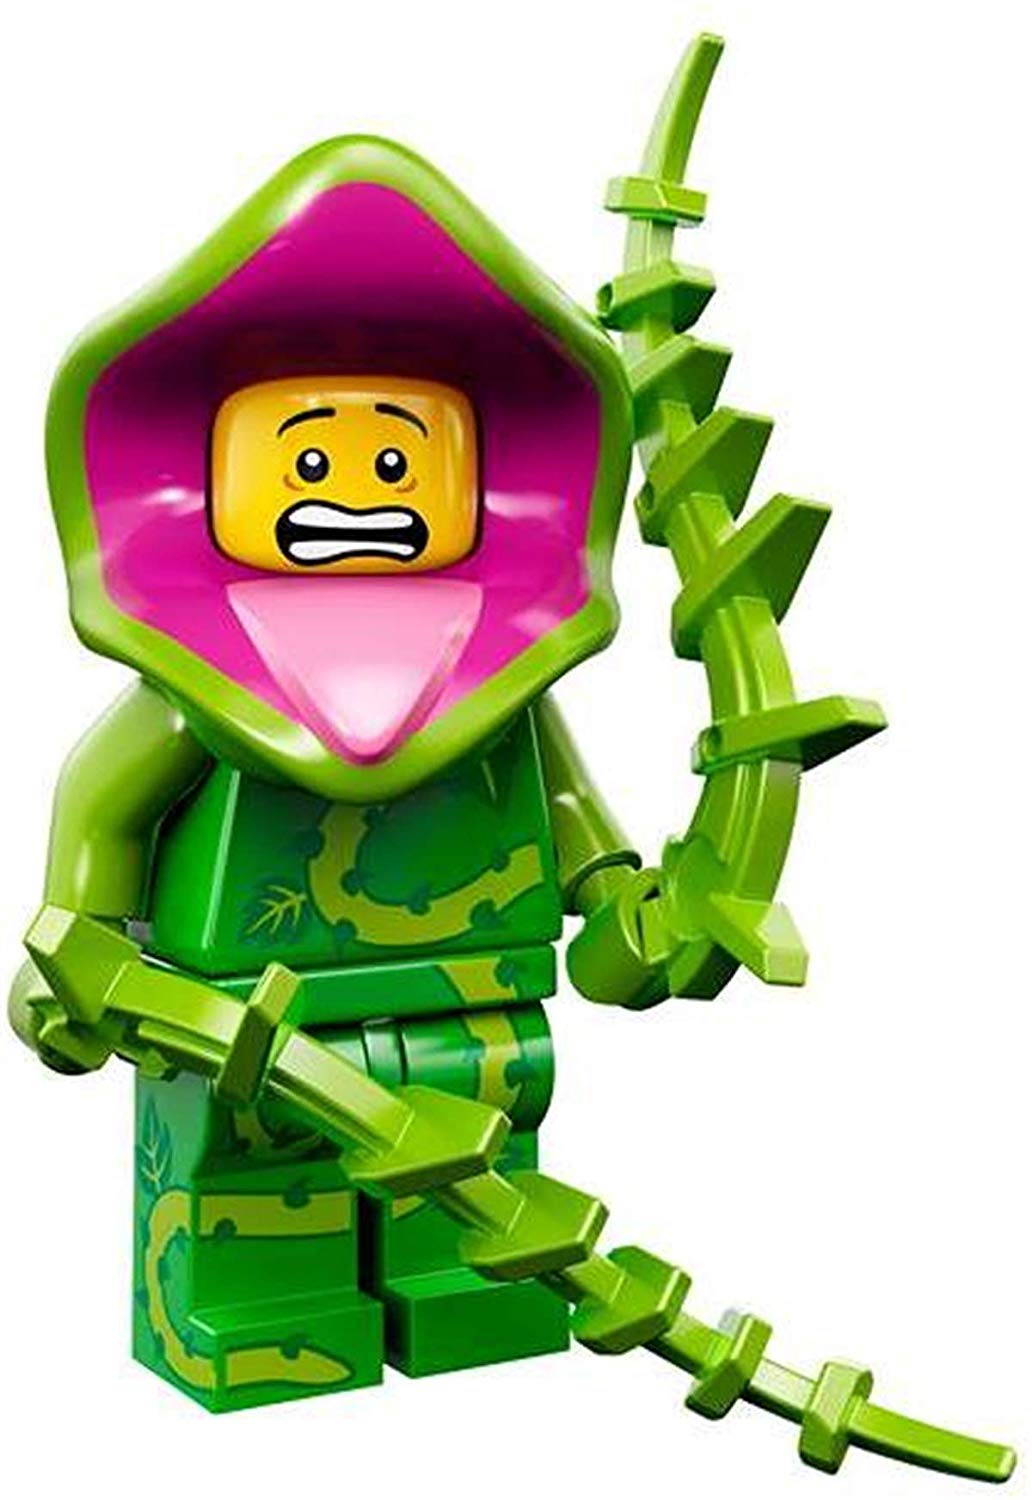 Lego Series 14 Minif Igure Plant Monster By Lego